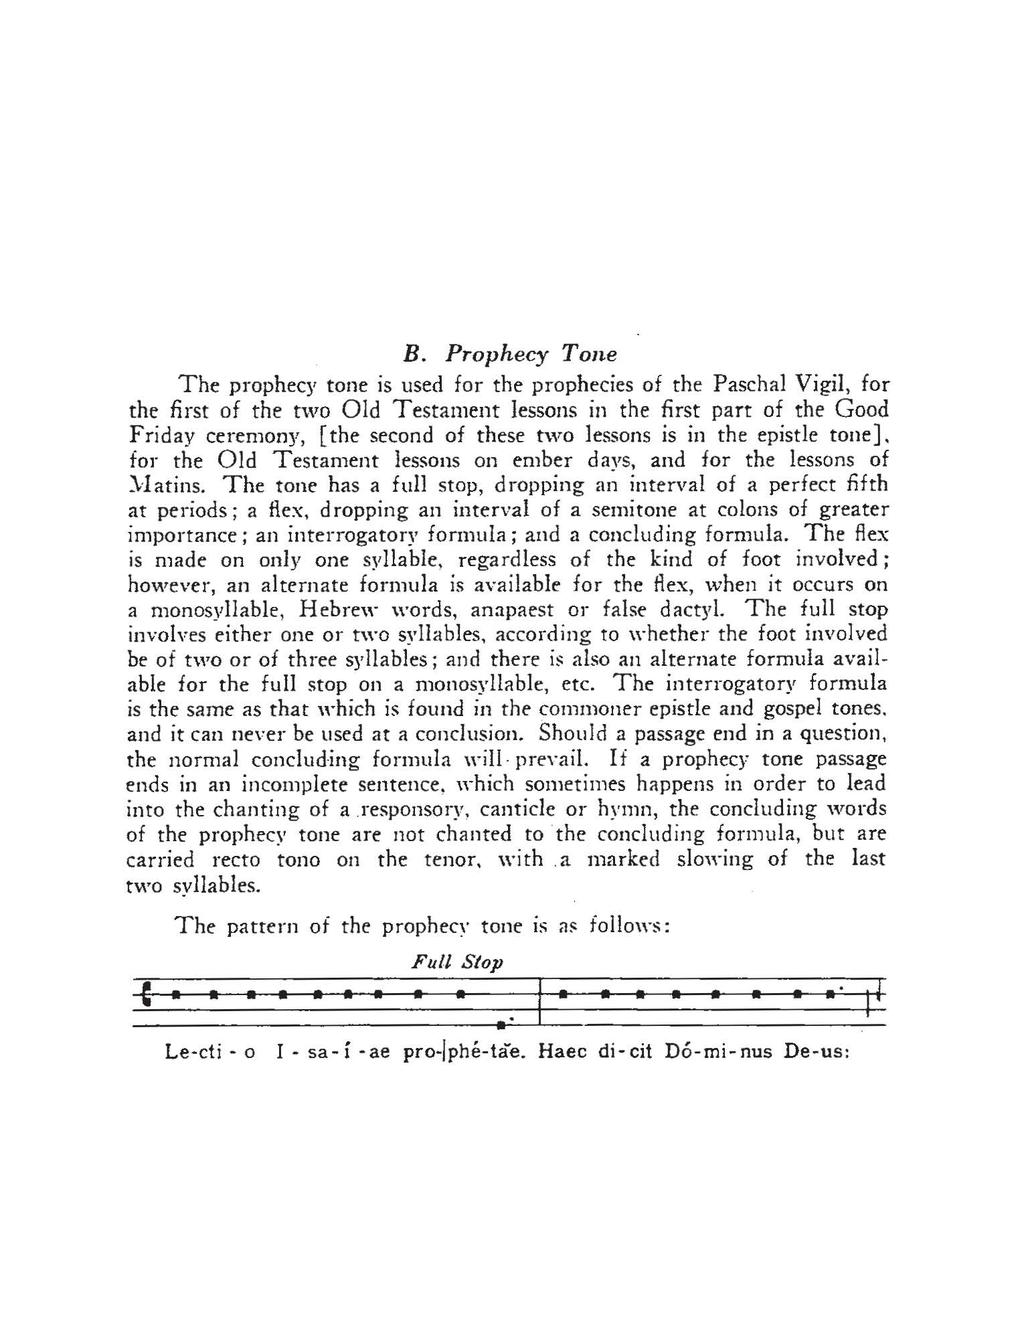 How to sing the First Reading at Mass in English & Latin B Prophecy Tone The prophecy tone is used for the prophecies of the Paschal Vigil for the first of the two Old Testament lessons in the first